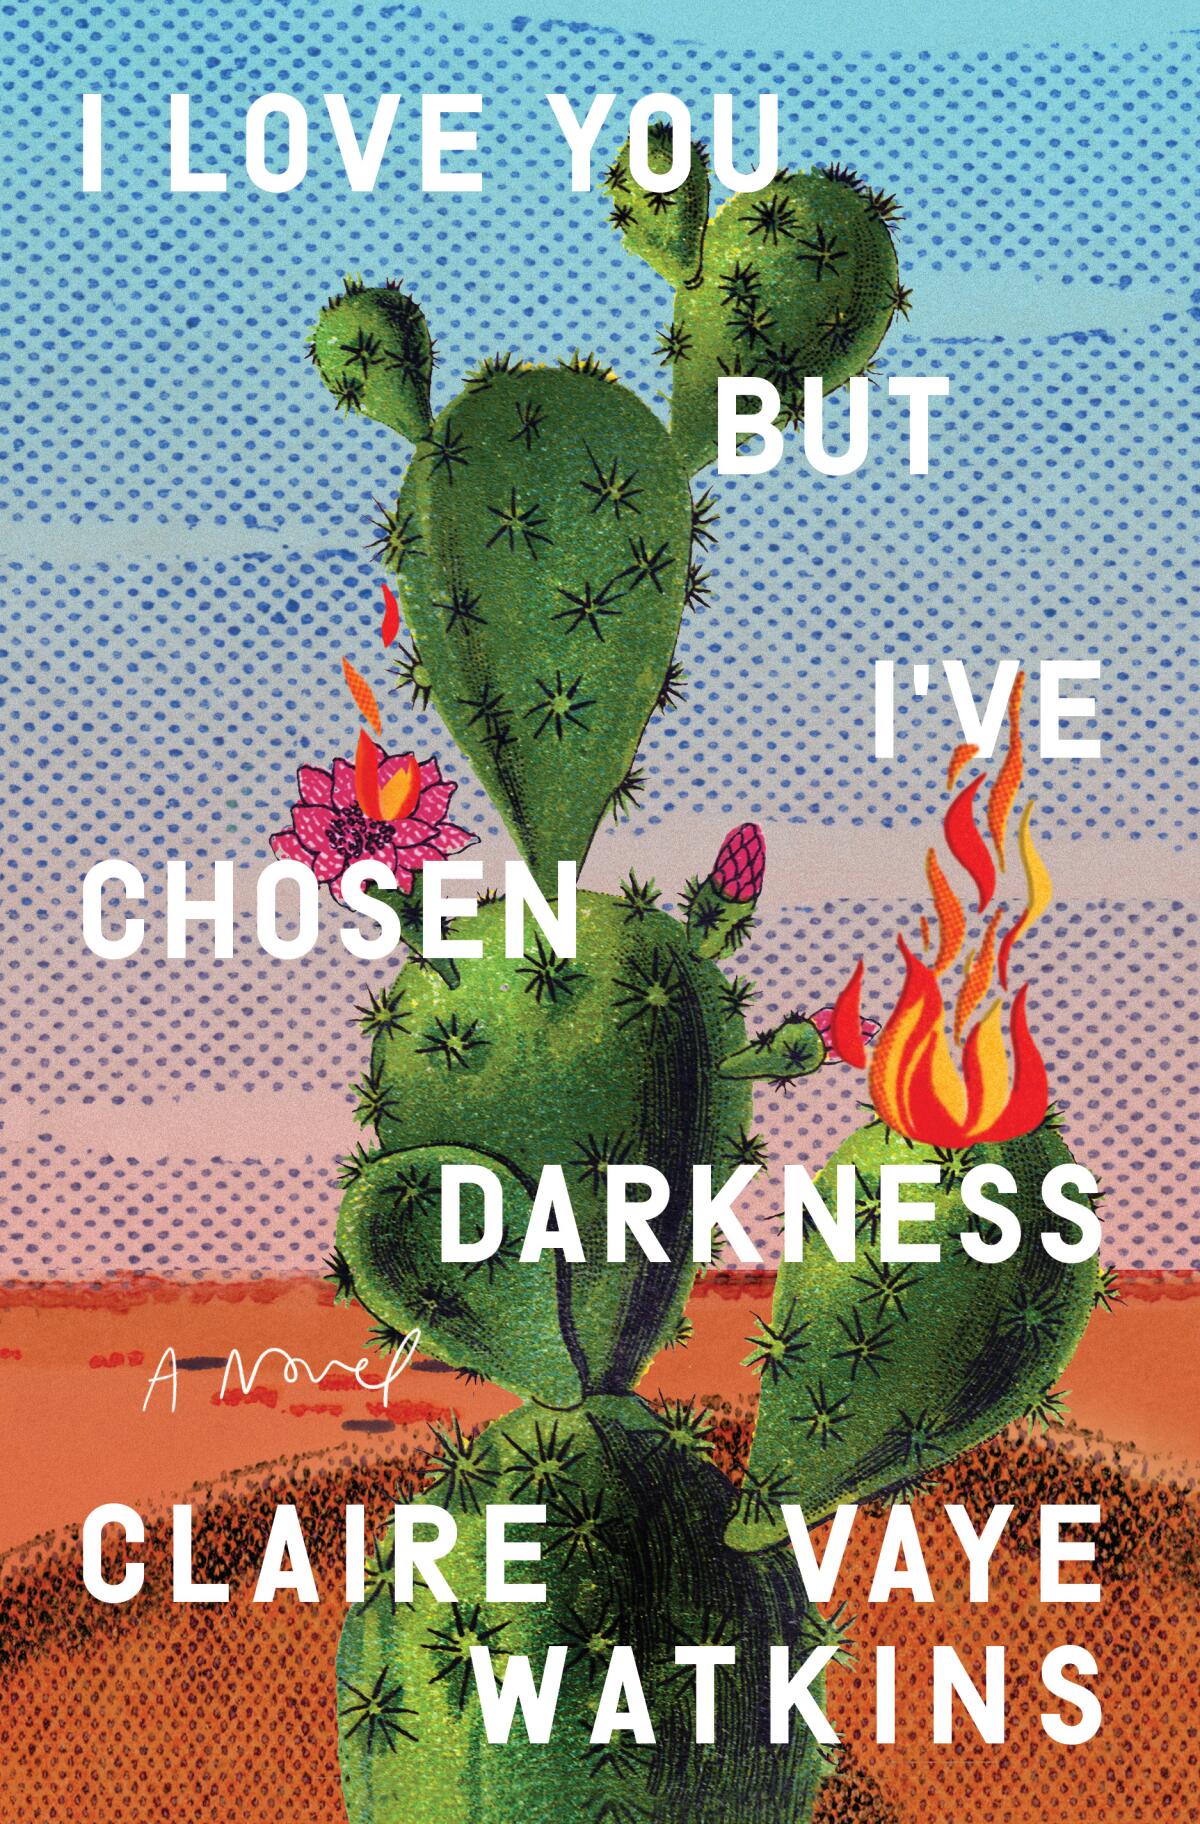 "I Love You But I've Chosen Darkness," by Claire Vaye Watkins